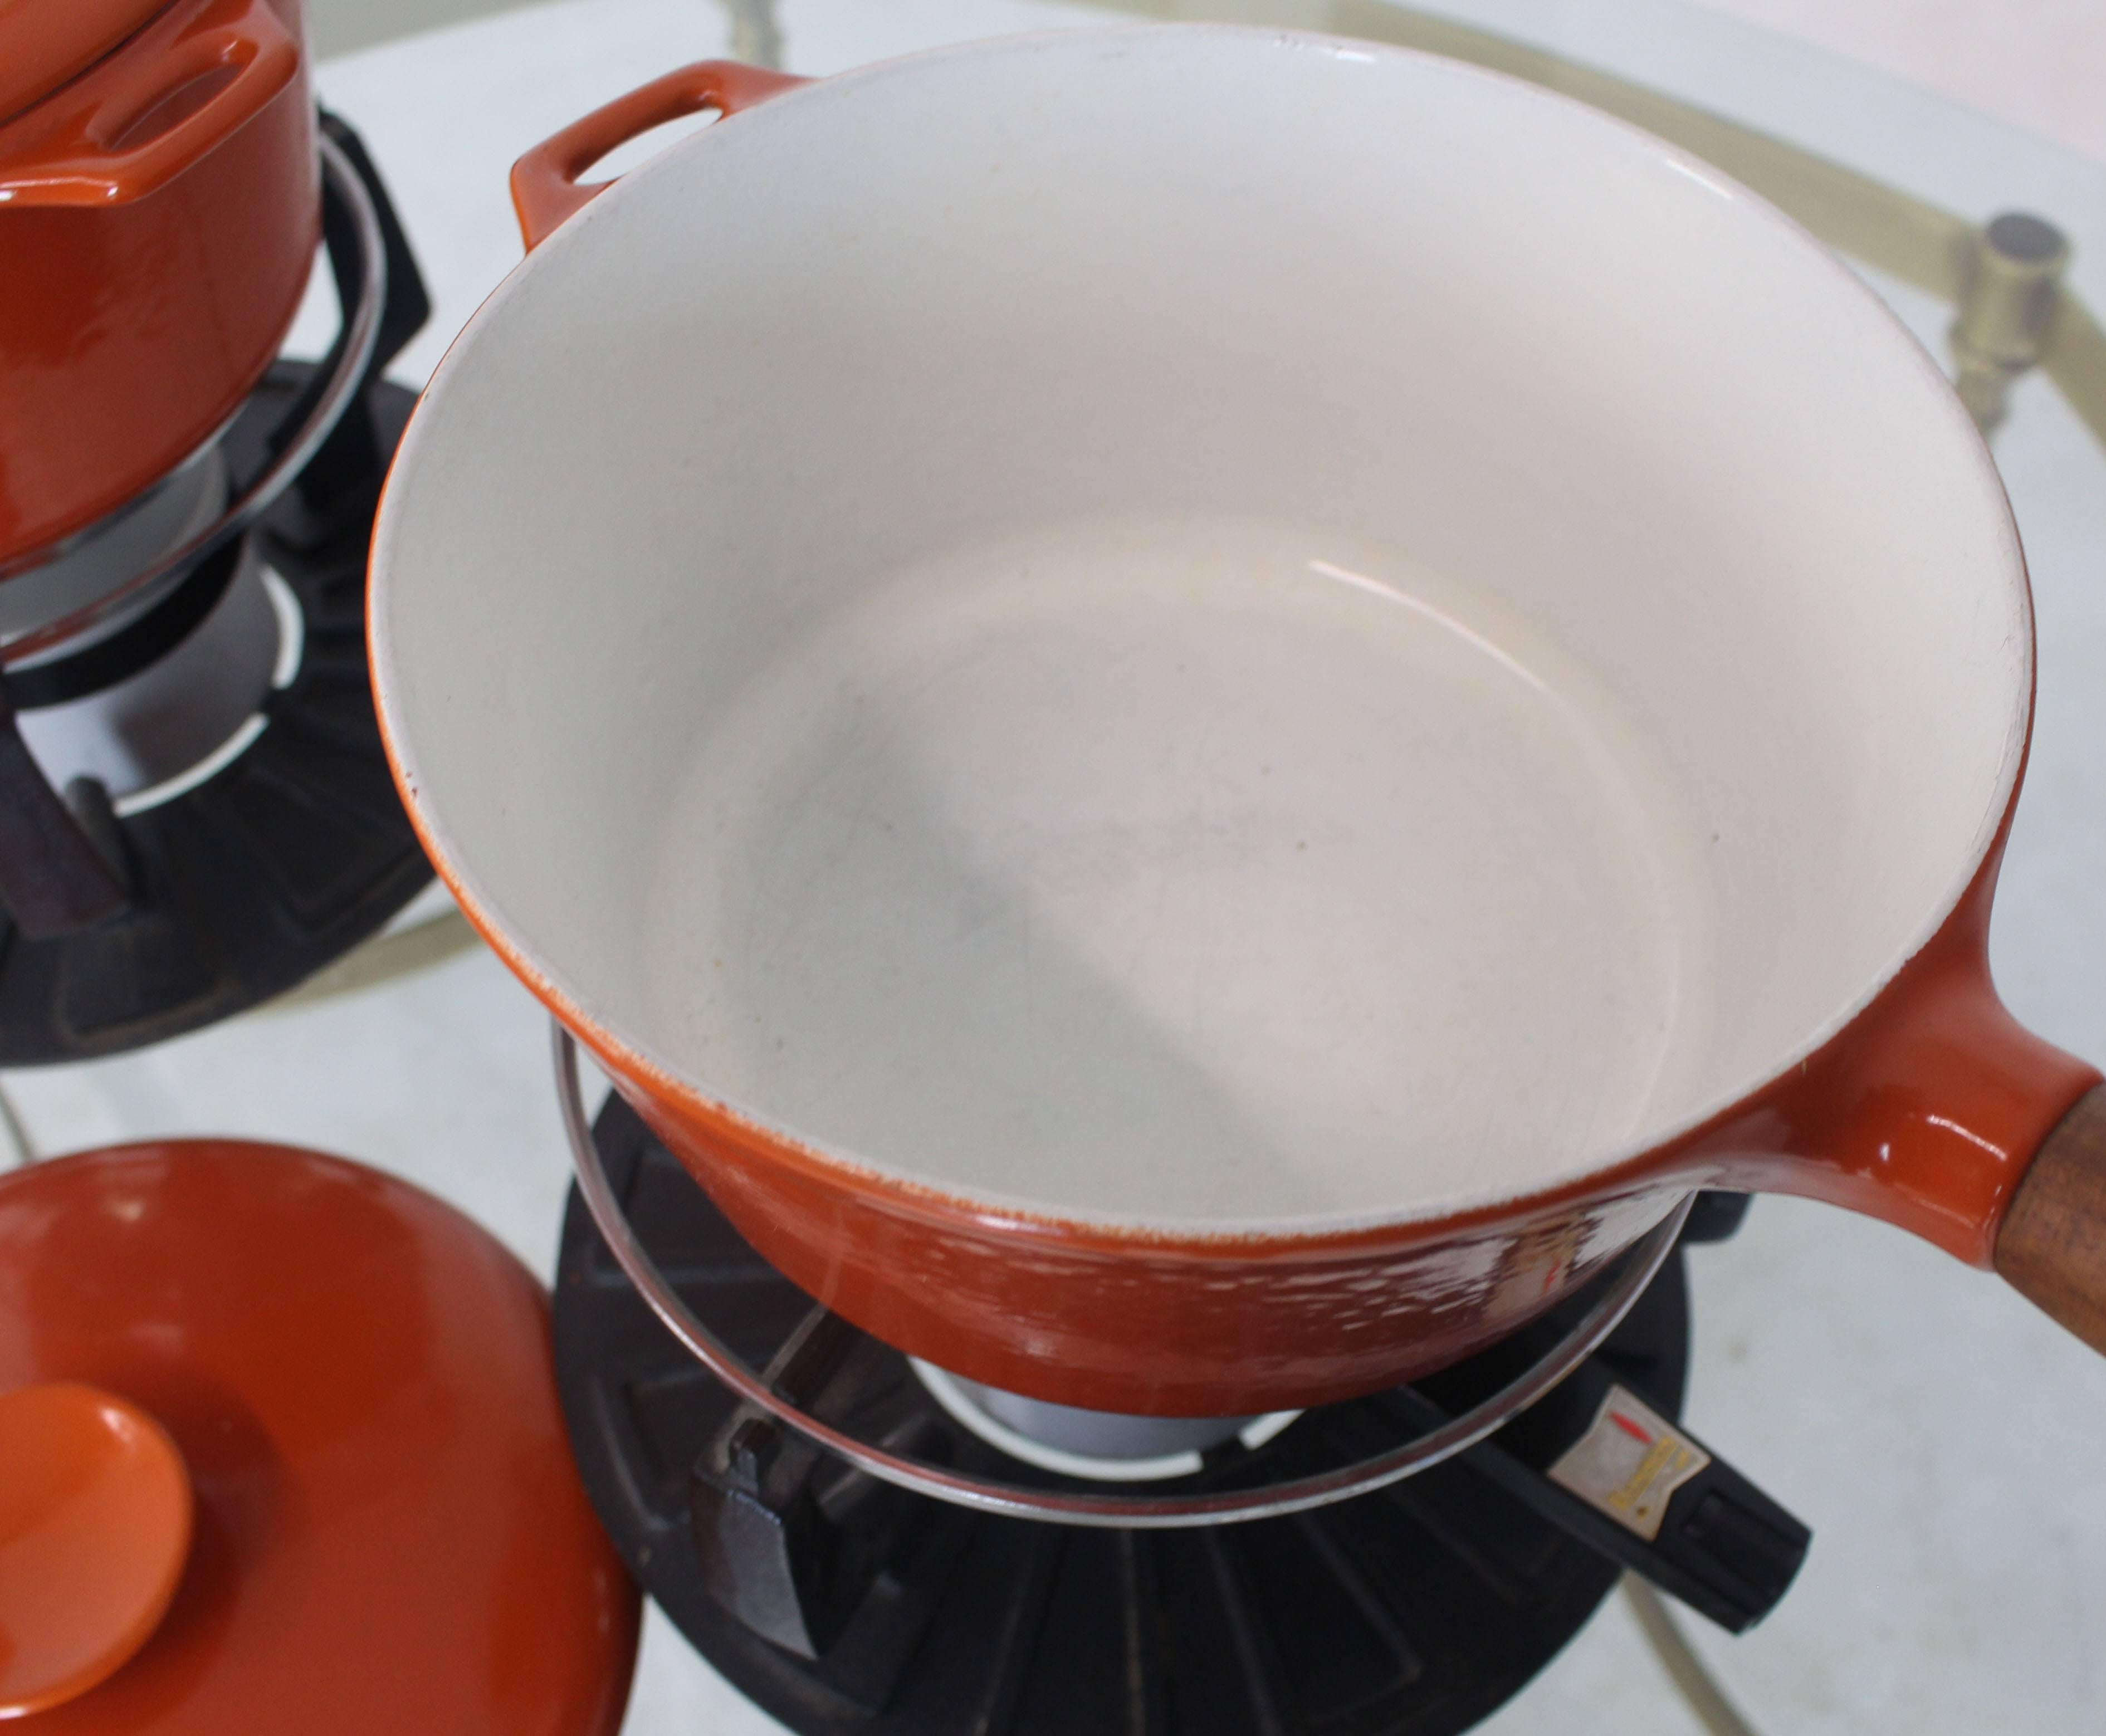 20th Century Pair of Danish Modern Orange Pots Sause Pans with Teak Handles and Food Warmers